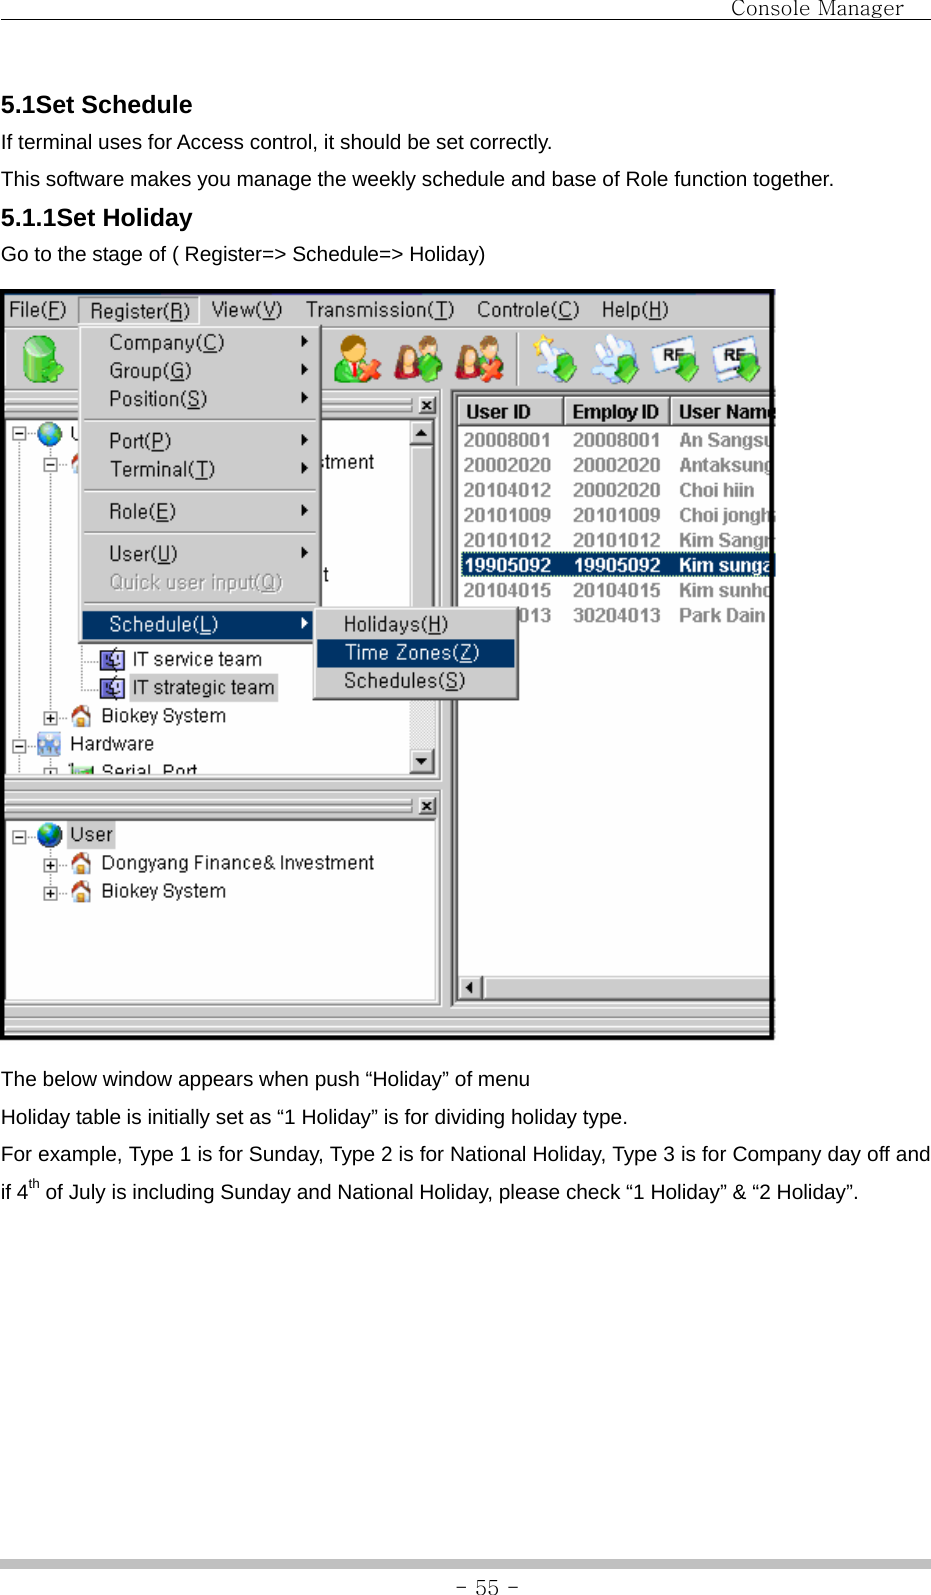                                Console Manager               - 55 -5.1Set Schedule If terminal uses for Access control, it should be set correctly. This software makes you manage the weekly schedule and base of Role function together. 5.1.1Set Holiday Go to the stage of ( Register=&gt; Schedule=&gt; Holiday)  The below window appears when push “Holiday” of menu Holiday table is initially set as “1 Holiday” is for dividing holiday type. For example, Type 1 is for Sunday, Type 2 is for National Holiday, Type 3 is for Company day off and if 4th of July is including Sunday and National Holiday, please check “1 Holiday” &amp; “2 Holiday”. 